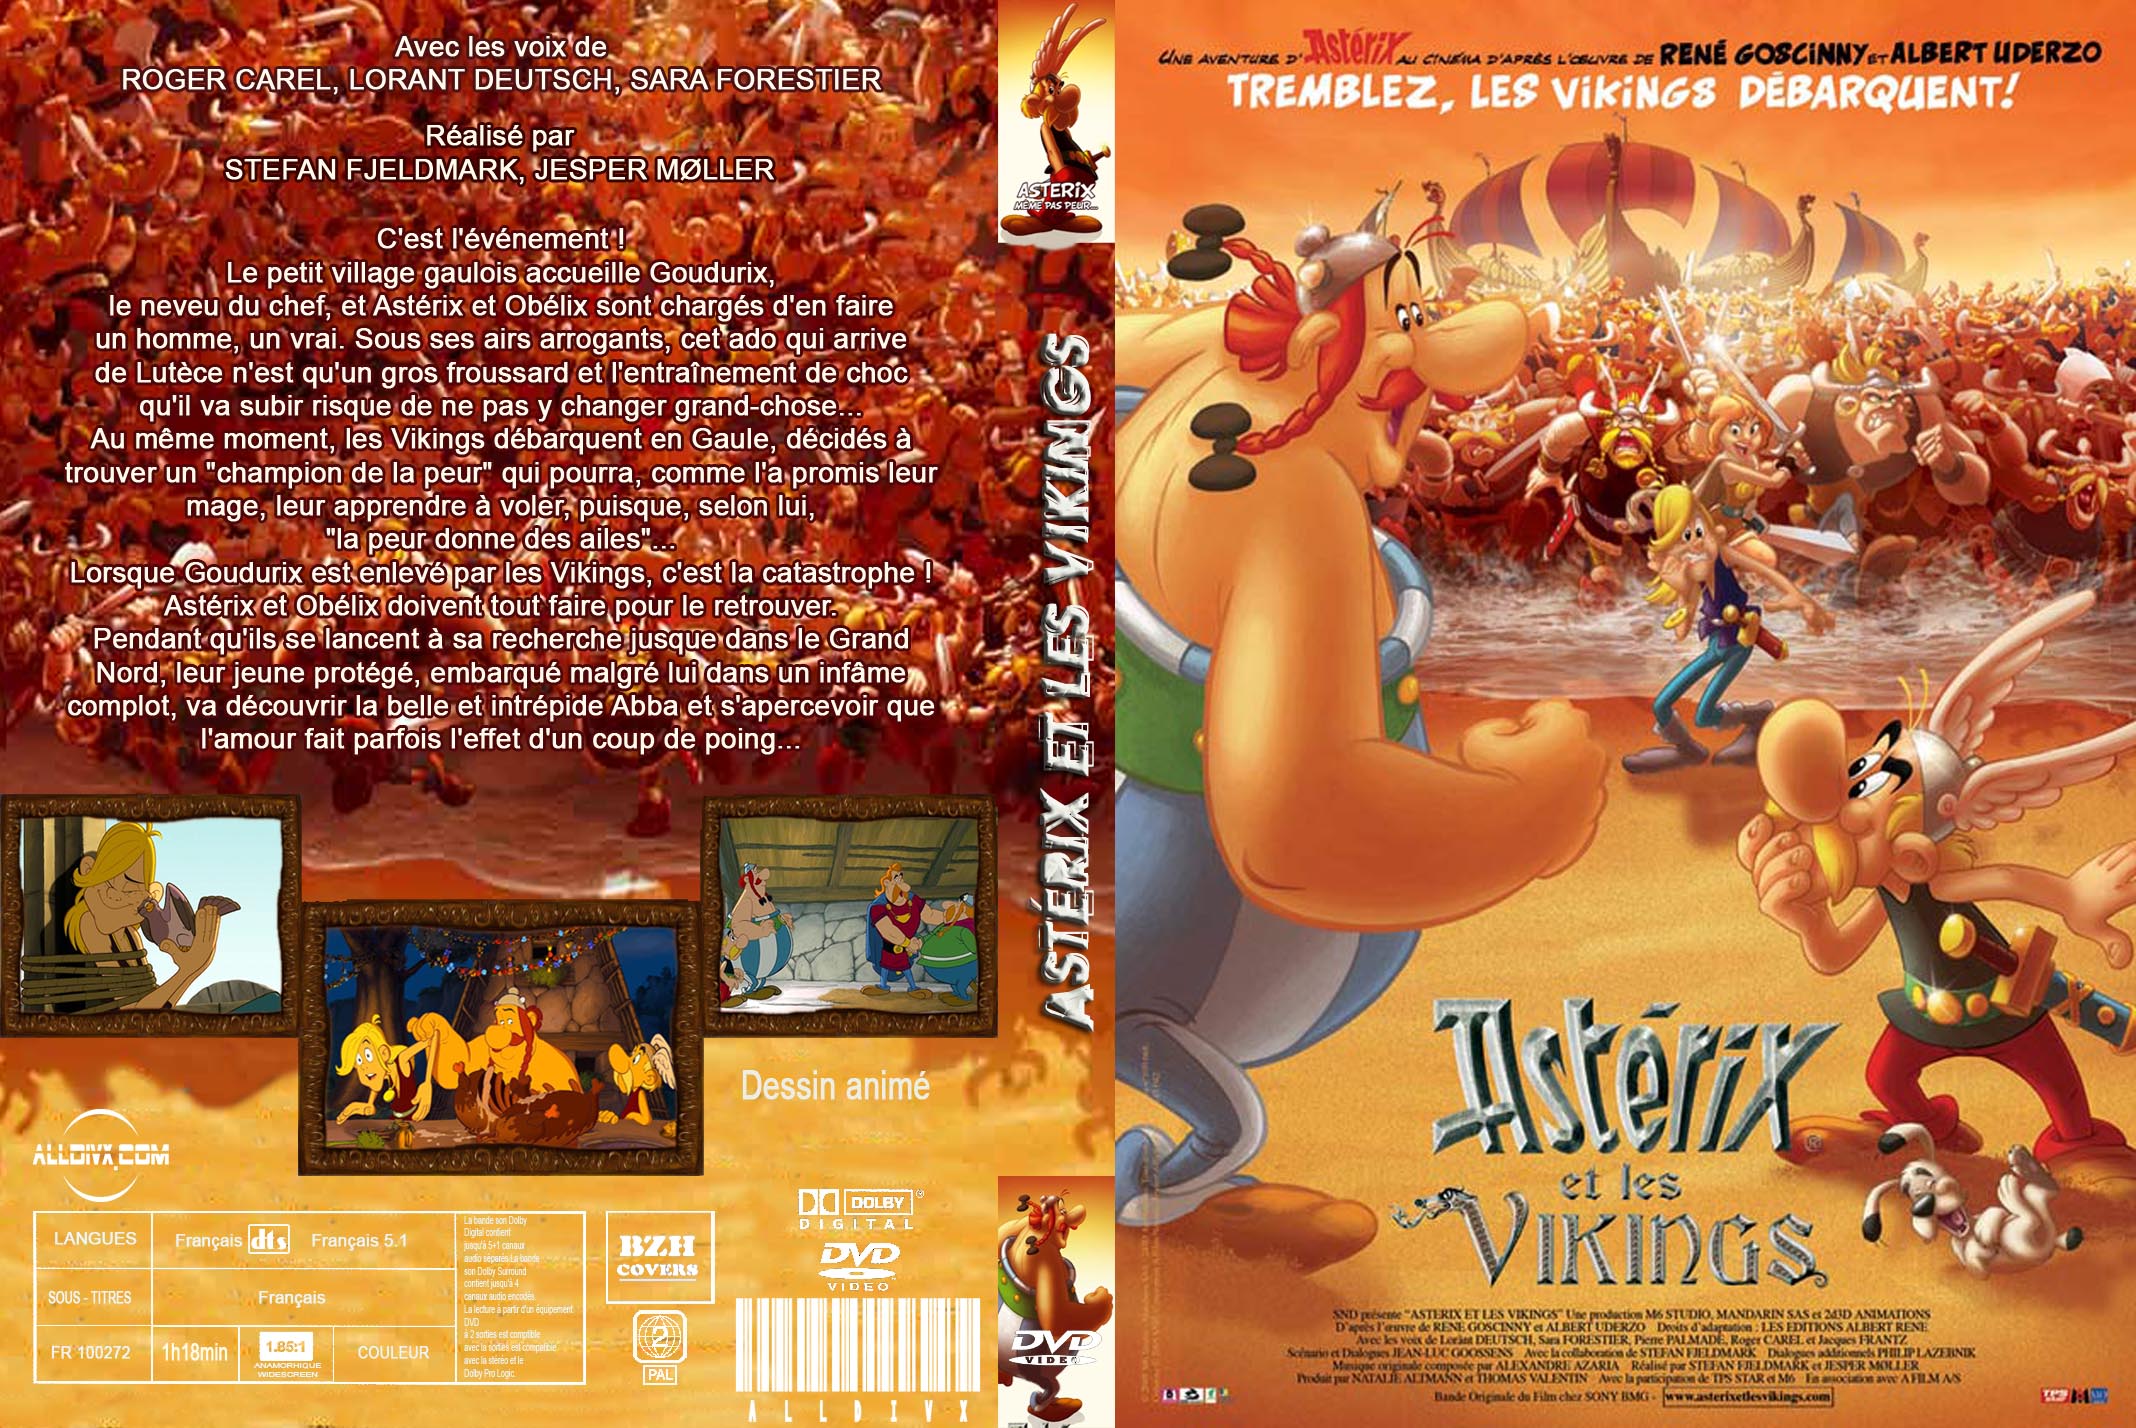 Asterix And The Vikings #3